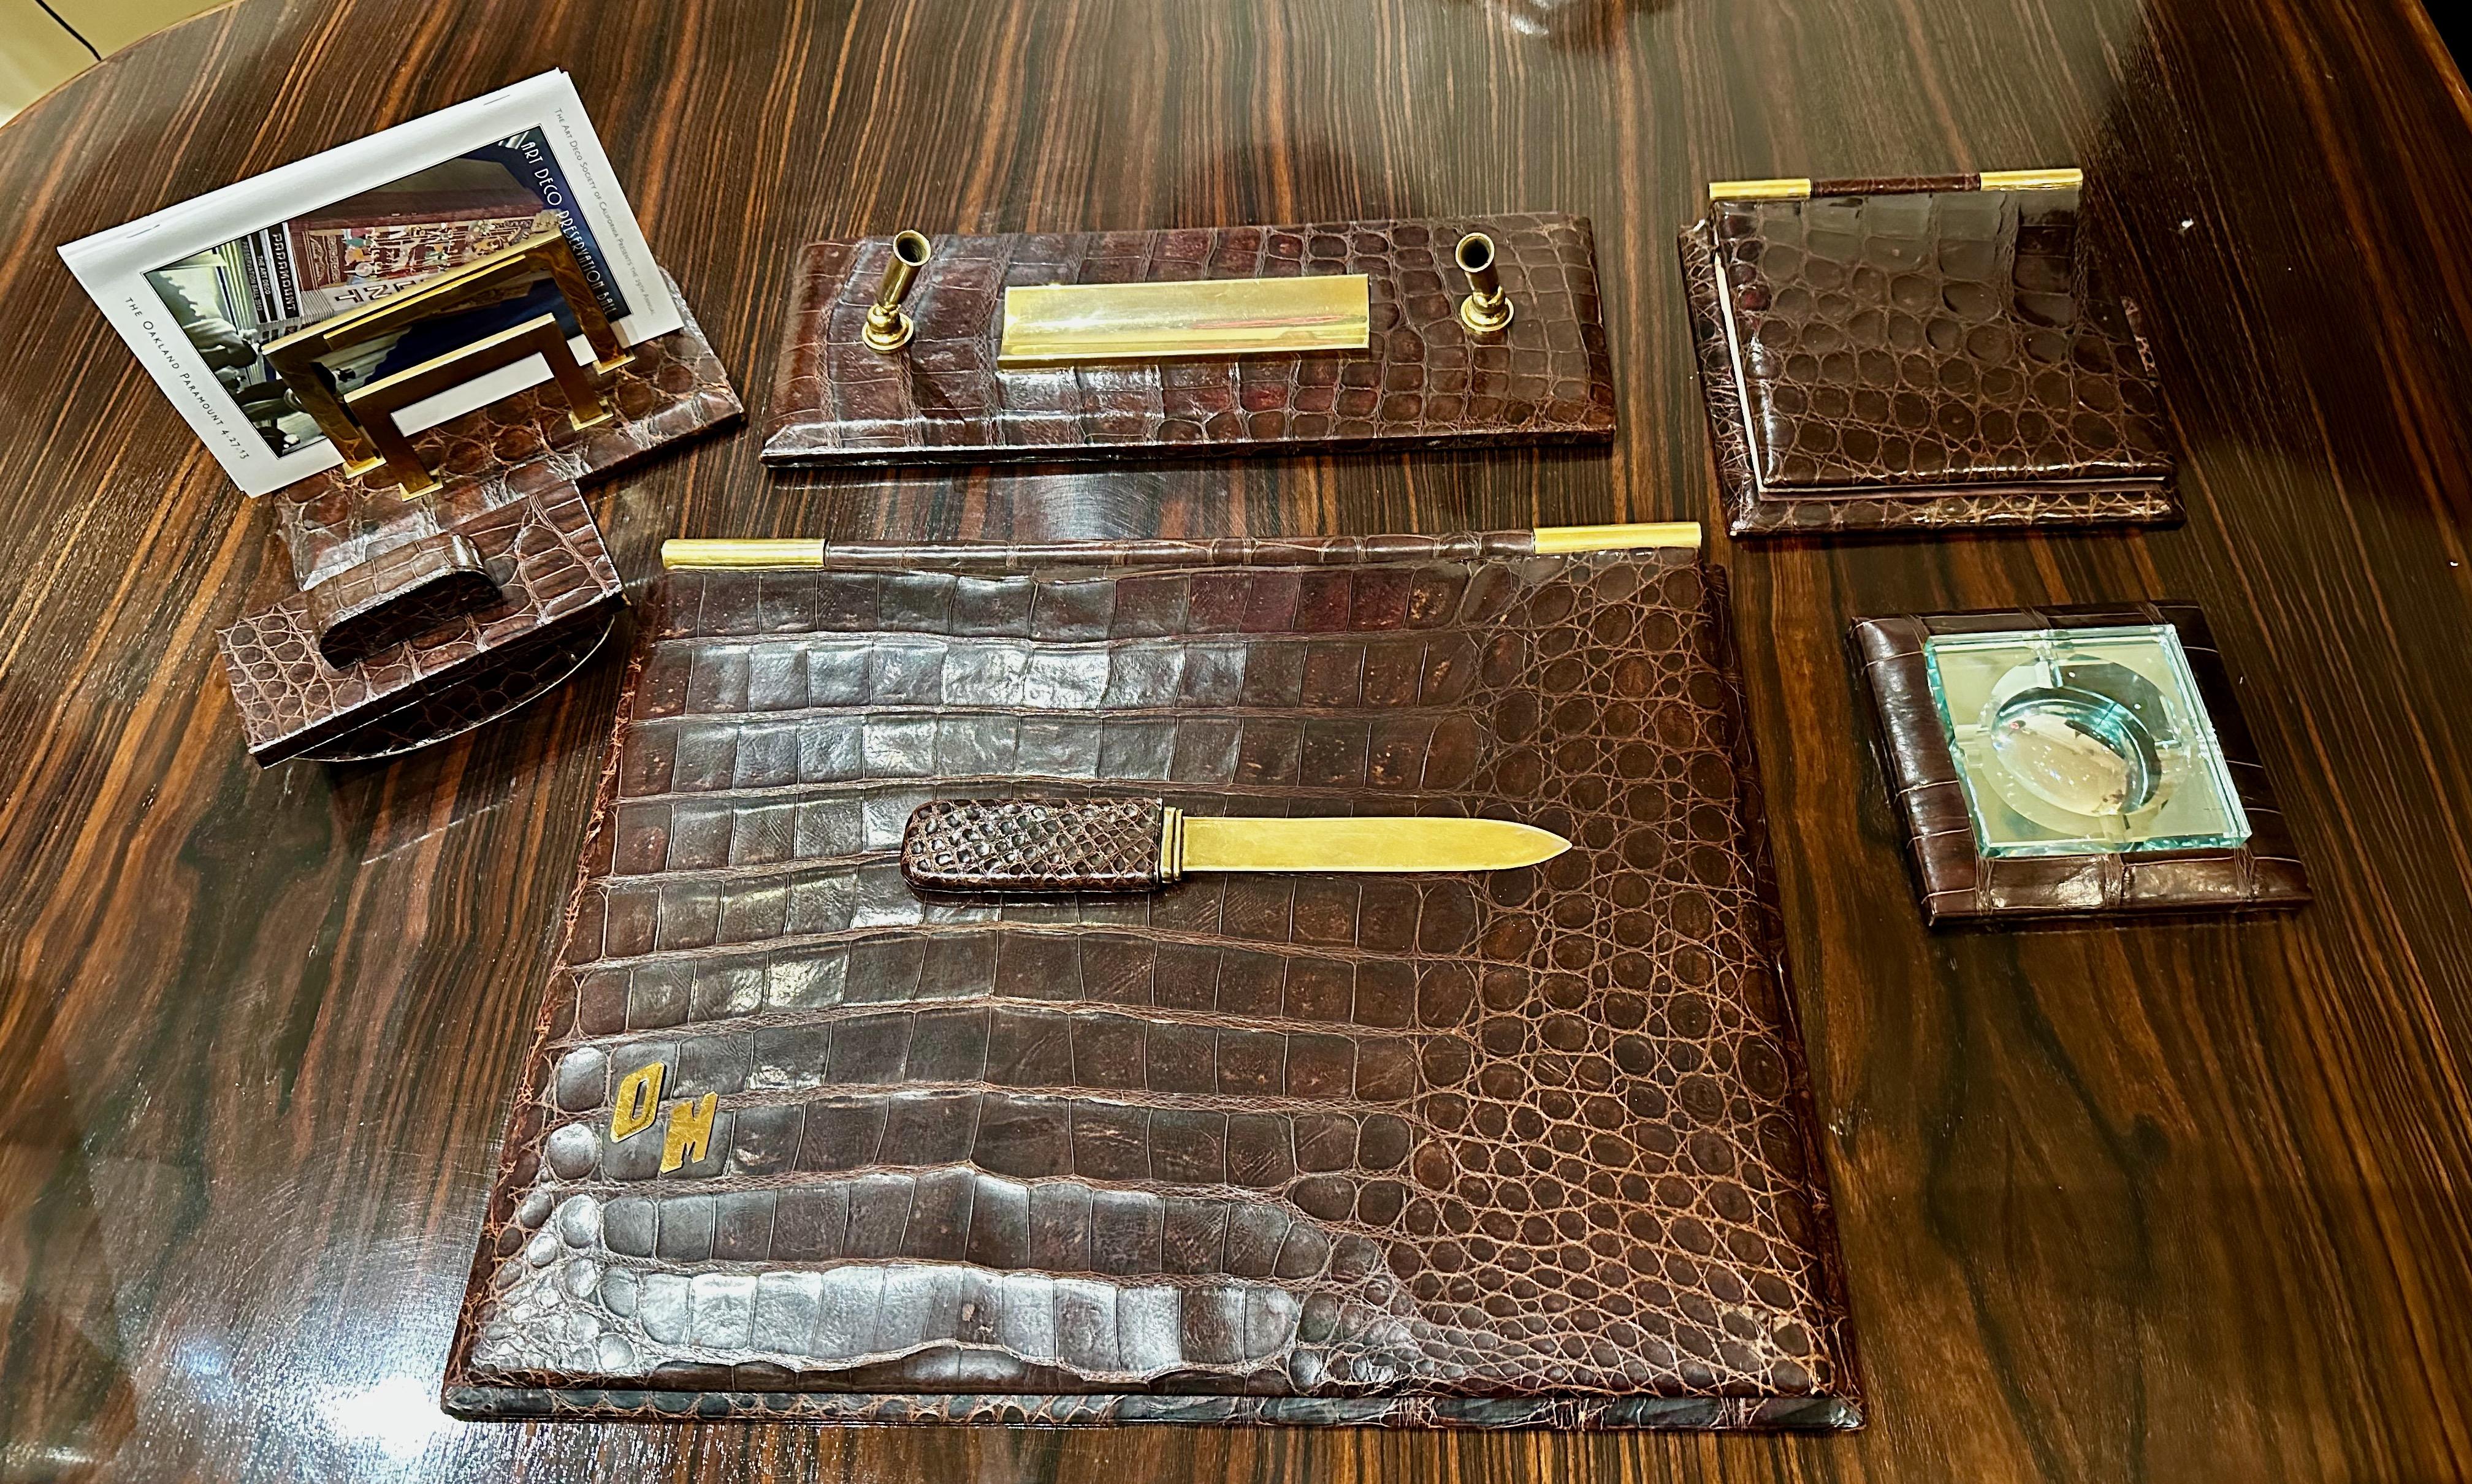 French Art Deco 7-piece crocodile skin desk set in the style of the Paris company Hermes, very fine 7- piece desk set in rich deep brown crocodile skin. May have been designed by Paul Dupré-Lafon who worked for Hermes and is best known for these